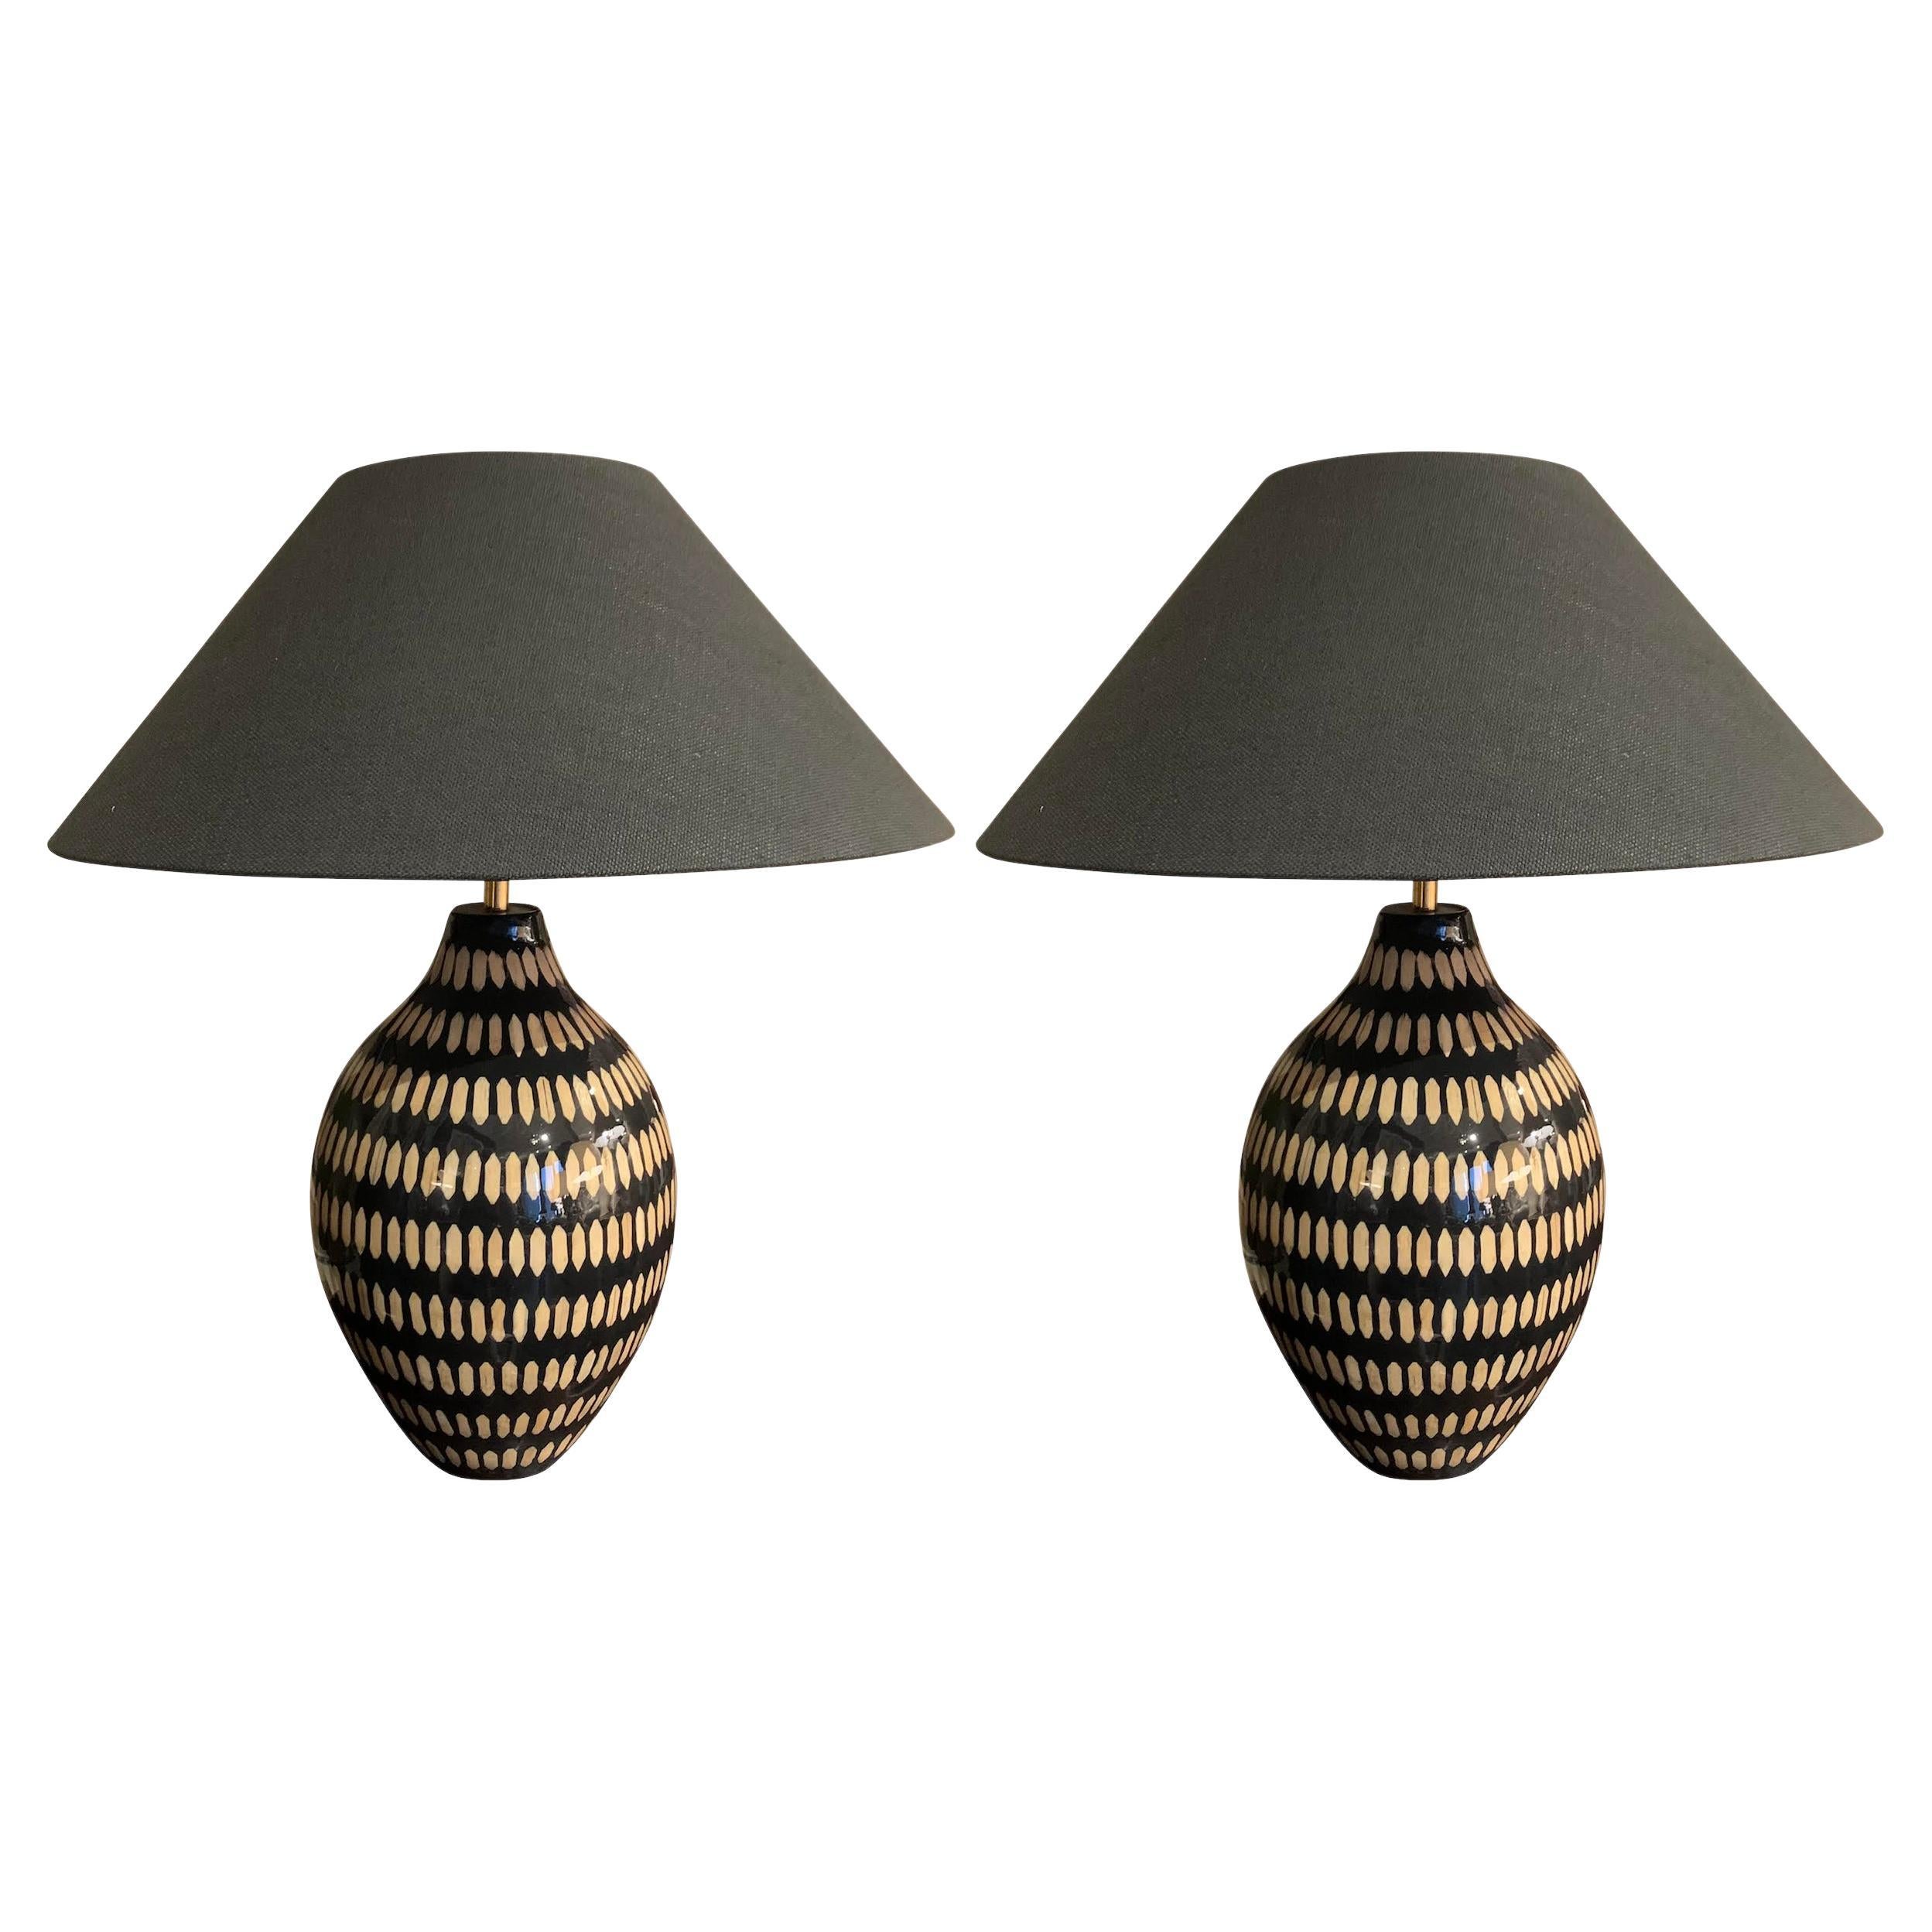 Black With Cream Lacquered Bamboo Pair Table Lamps, China, Contemporary